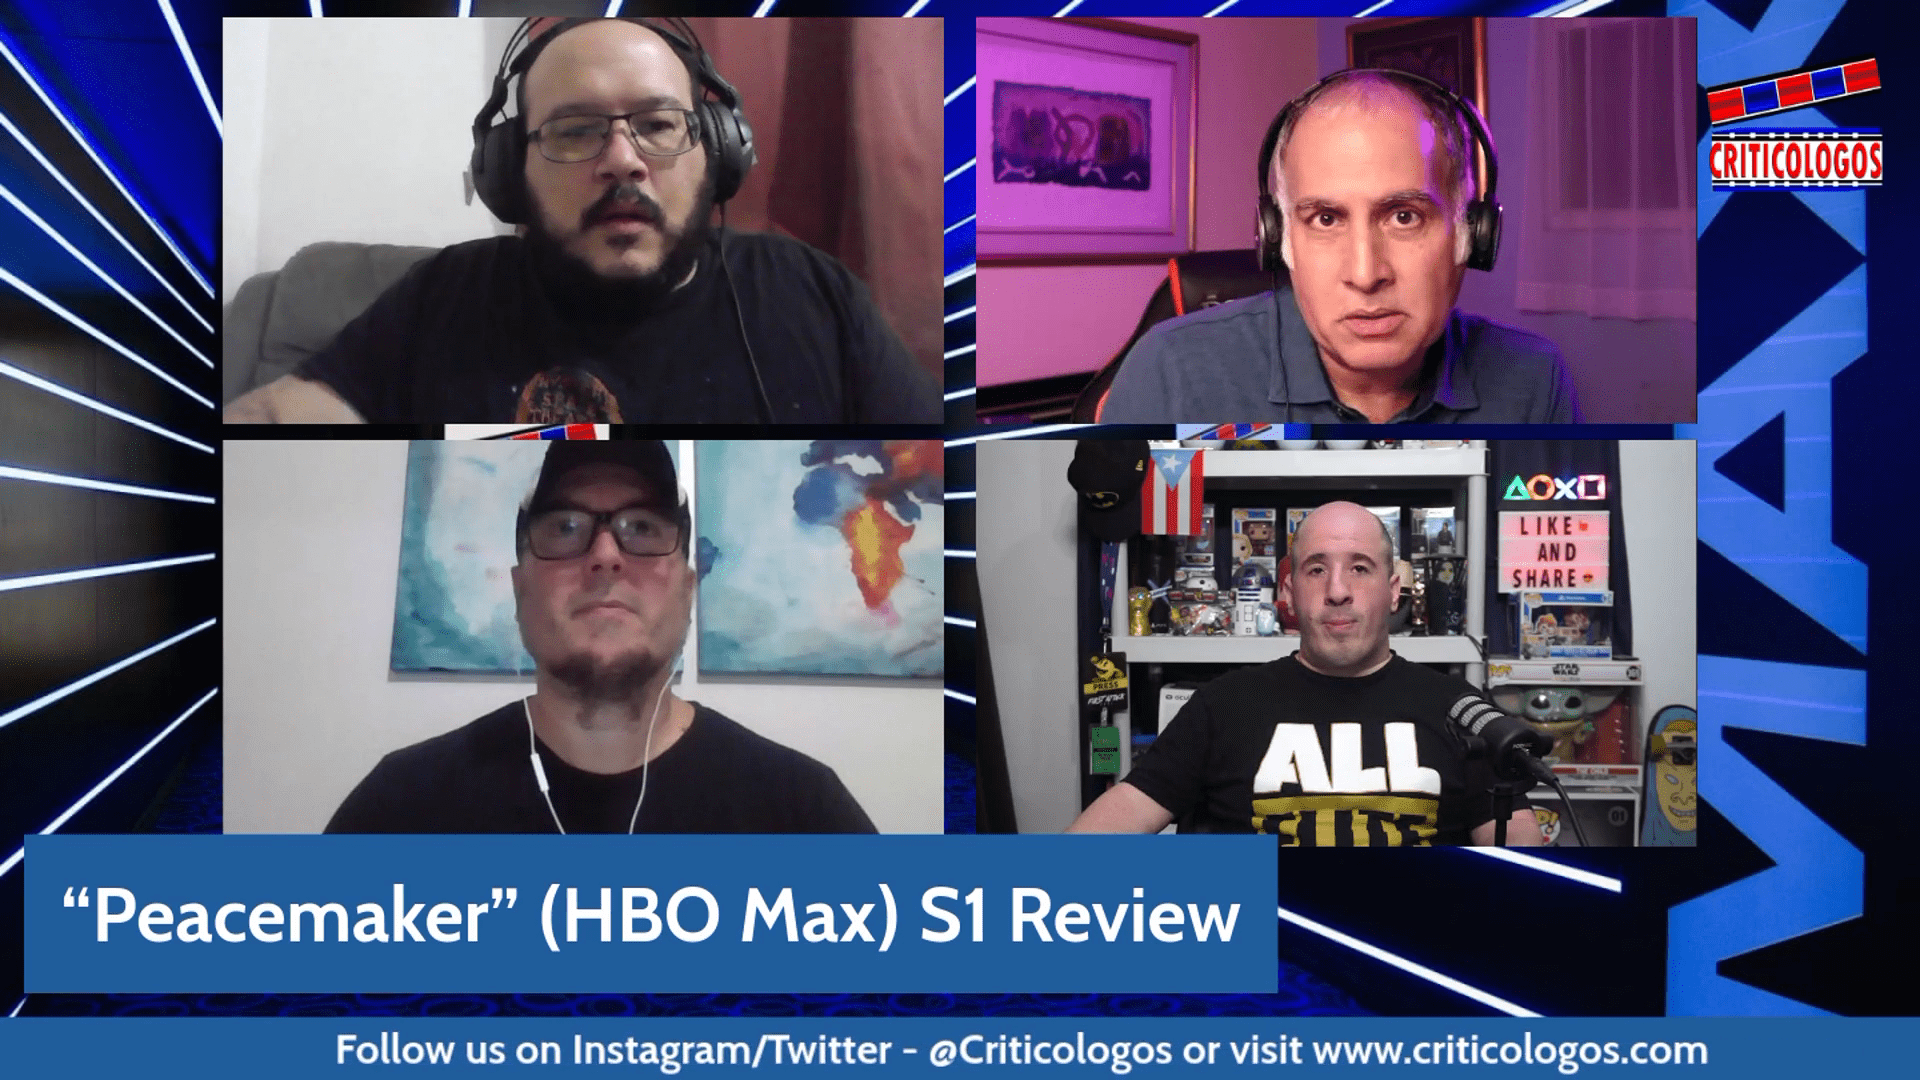 #Criticologos LIVE… “Peacemaker” (HBO Max) S1 Review, “Uncharted” Movie Review, & Super Bowl TV Spots & Trailers. #Peacemaker #UnchartedMovie #Reviews